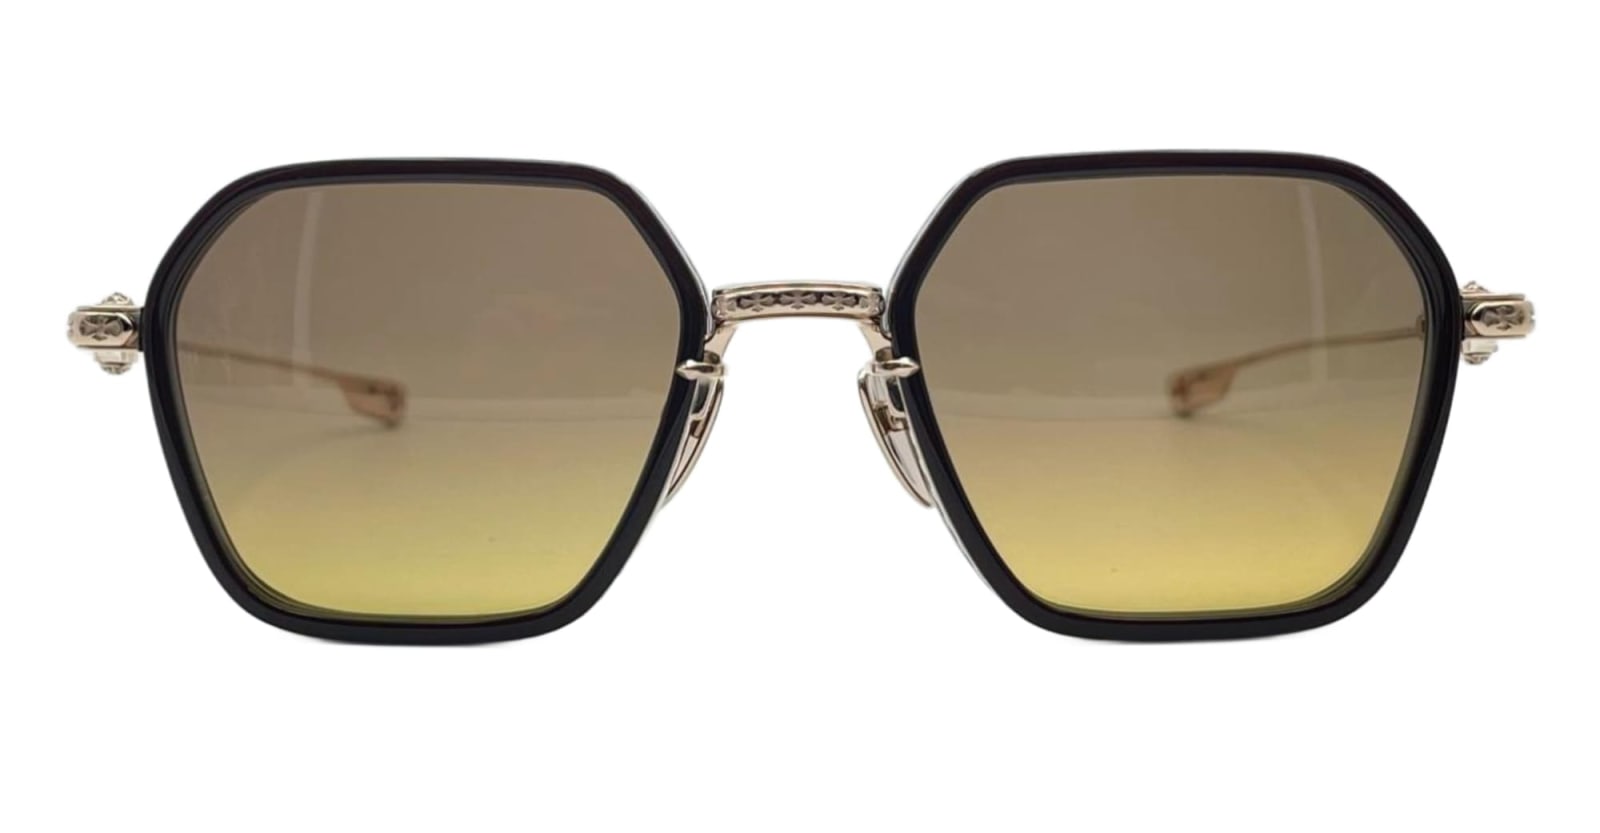 Danger Zone - Classic Brown / Gold Plated Sunglasses